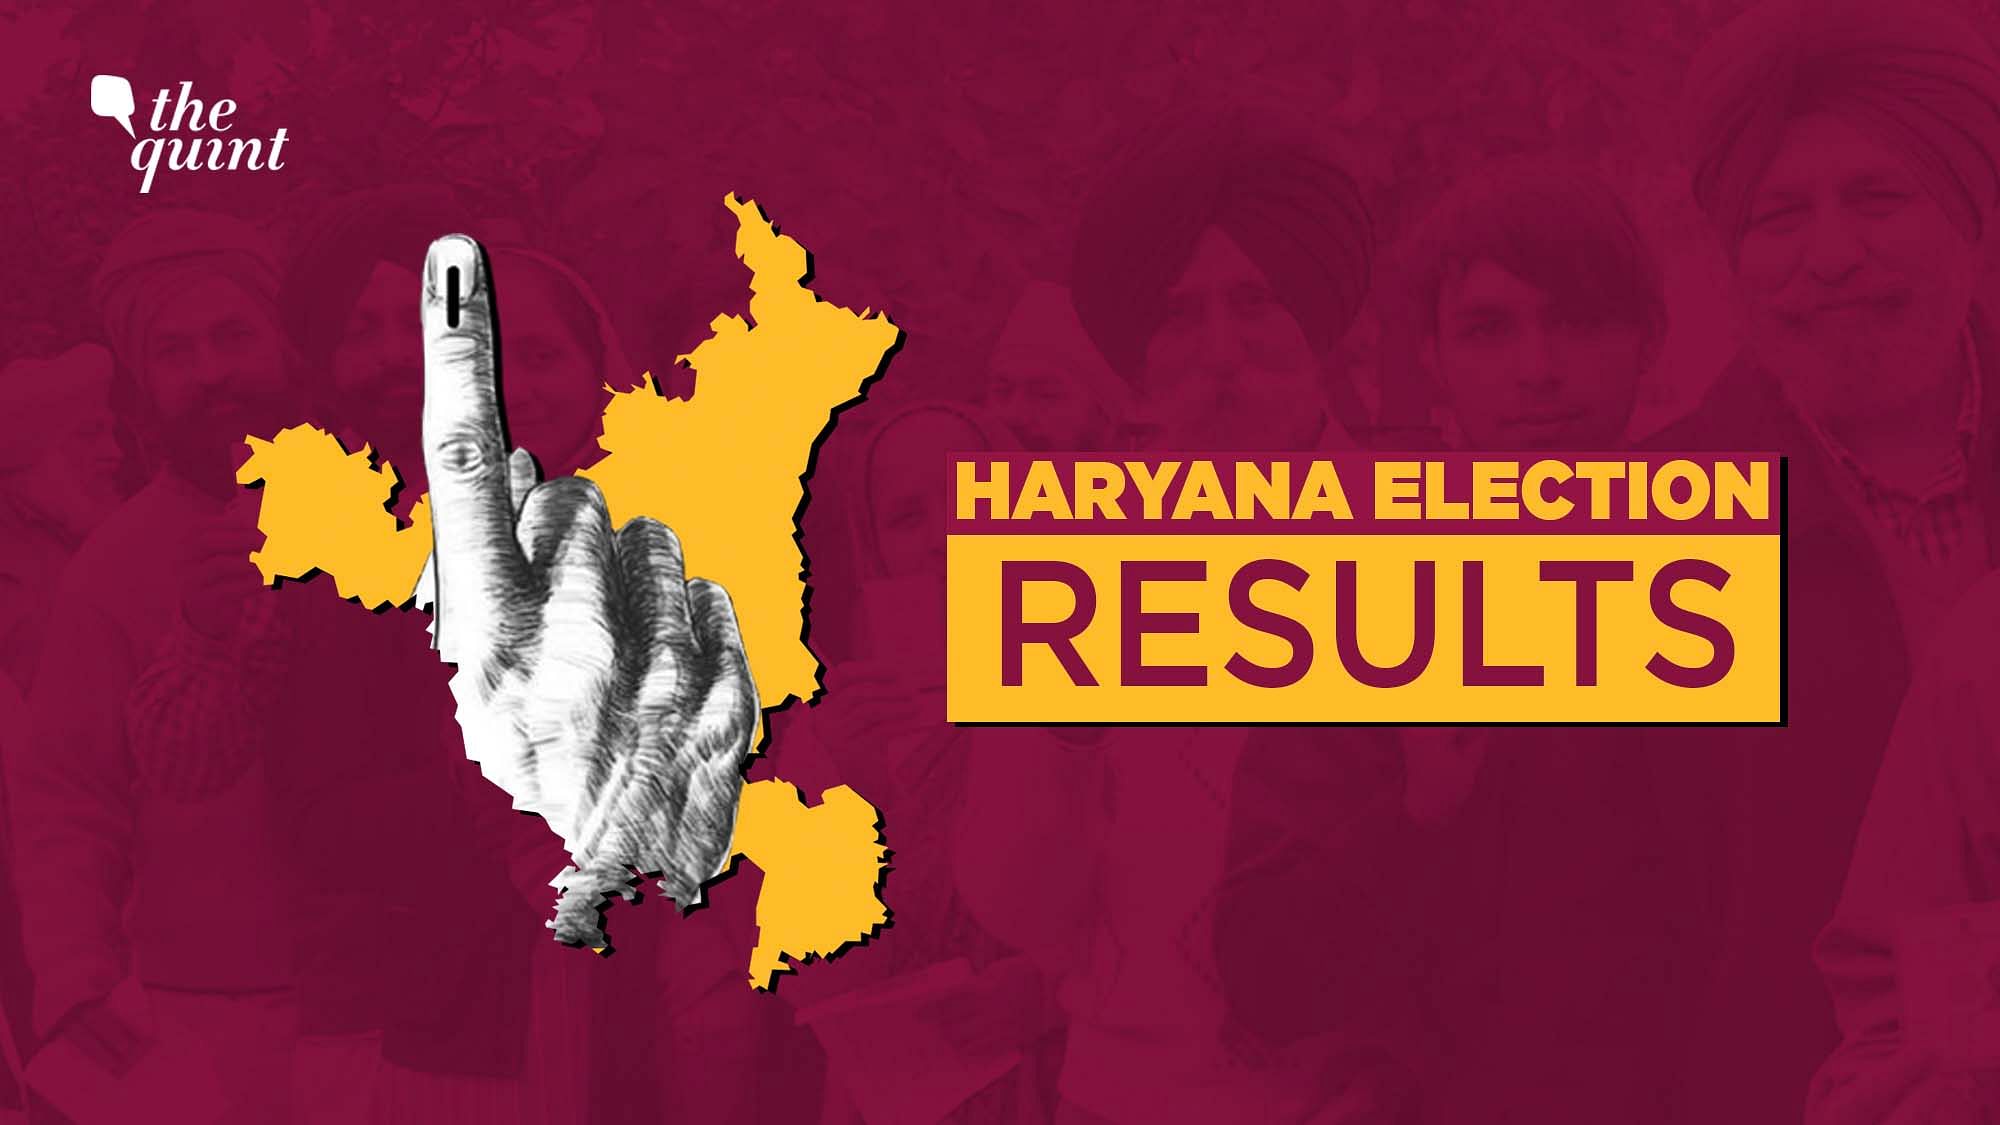 Catch all the live updates on the Haryana Elections 2019 here.